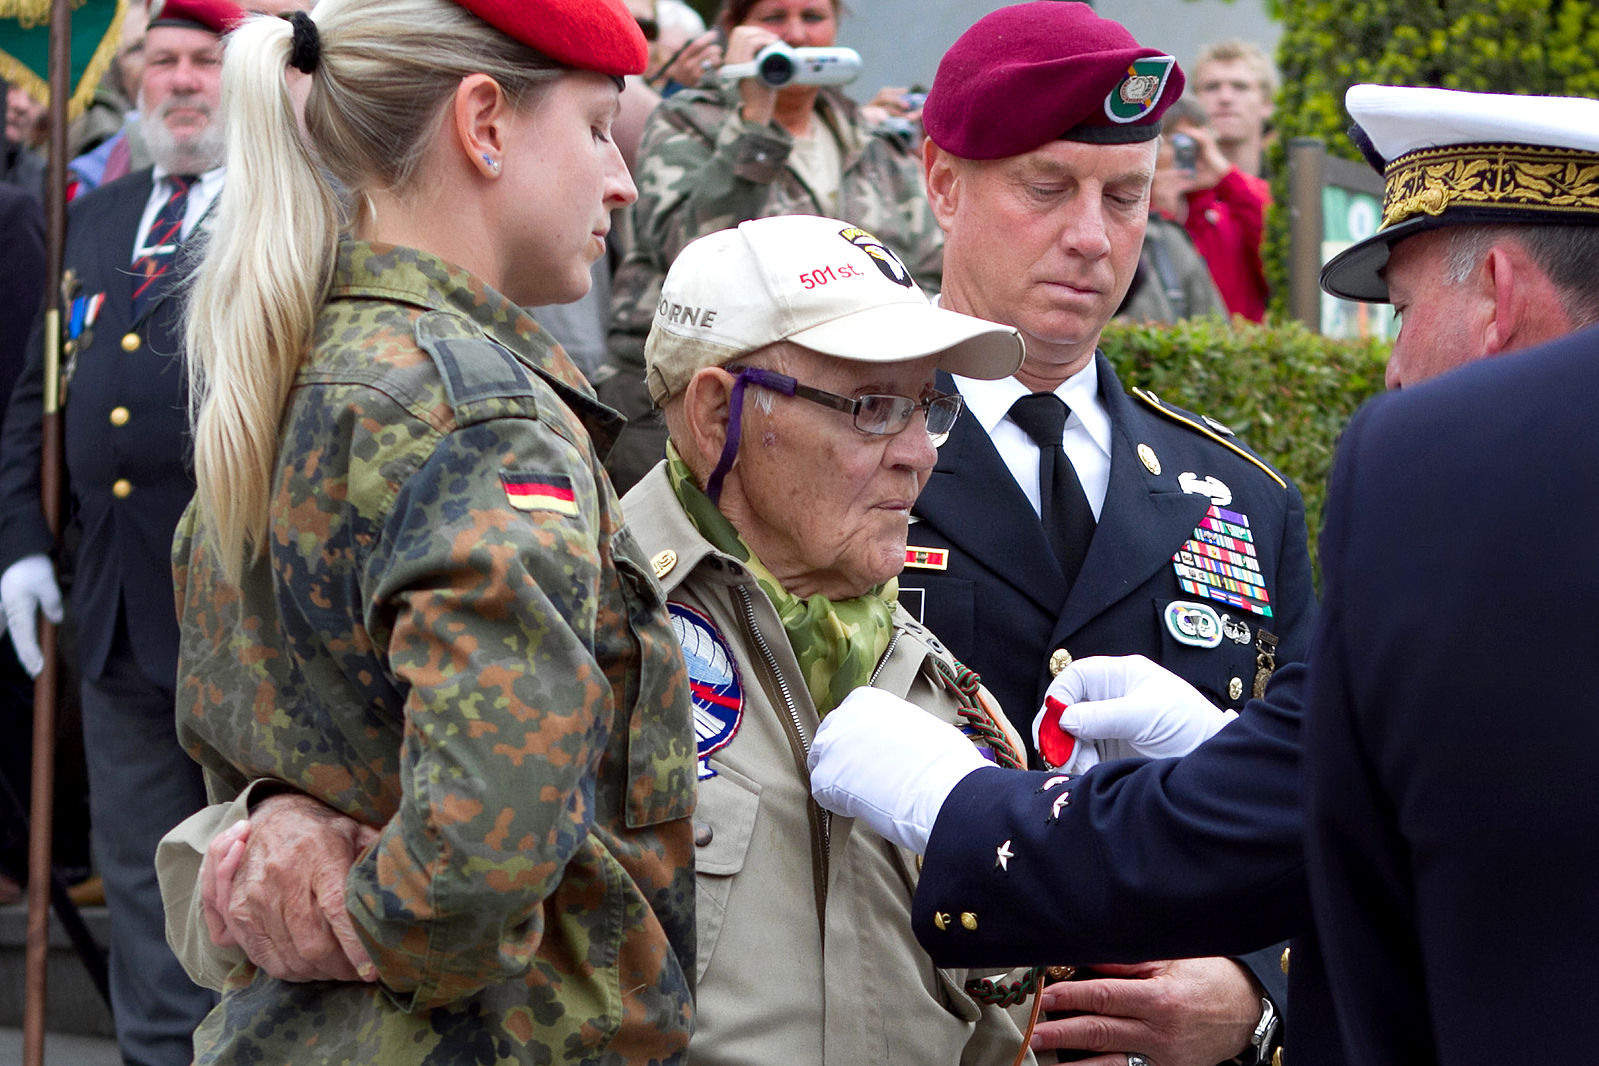 U.S. Army paratrooper Robert Wright with the Legion of Honor medal during a ceremony in Sainte Mere Eglise, France, June 6, 2011. Department of Defense 